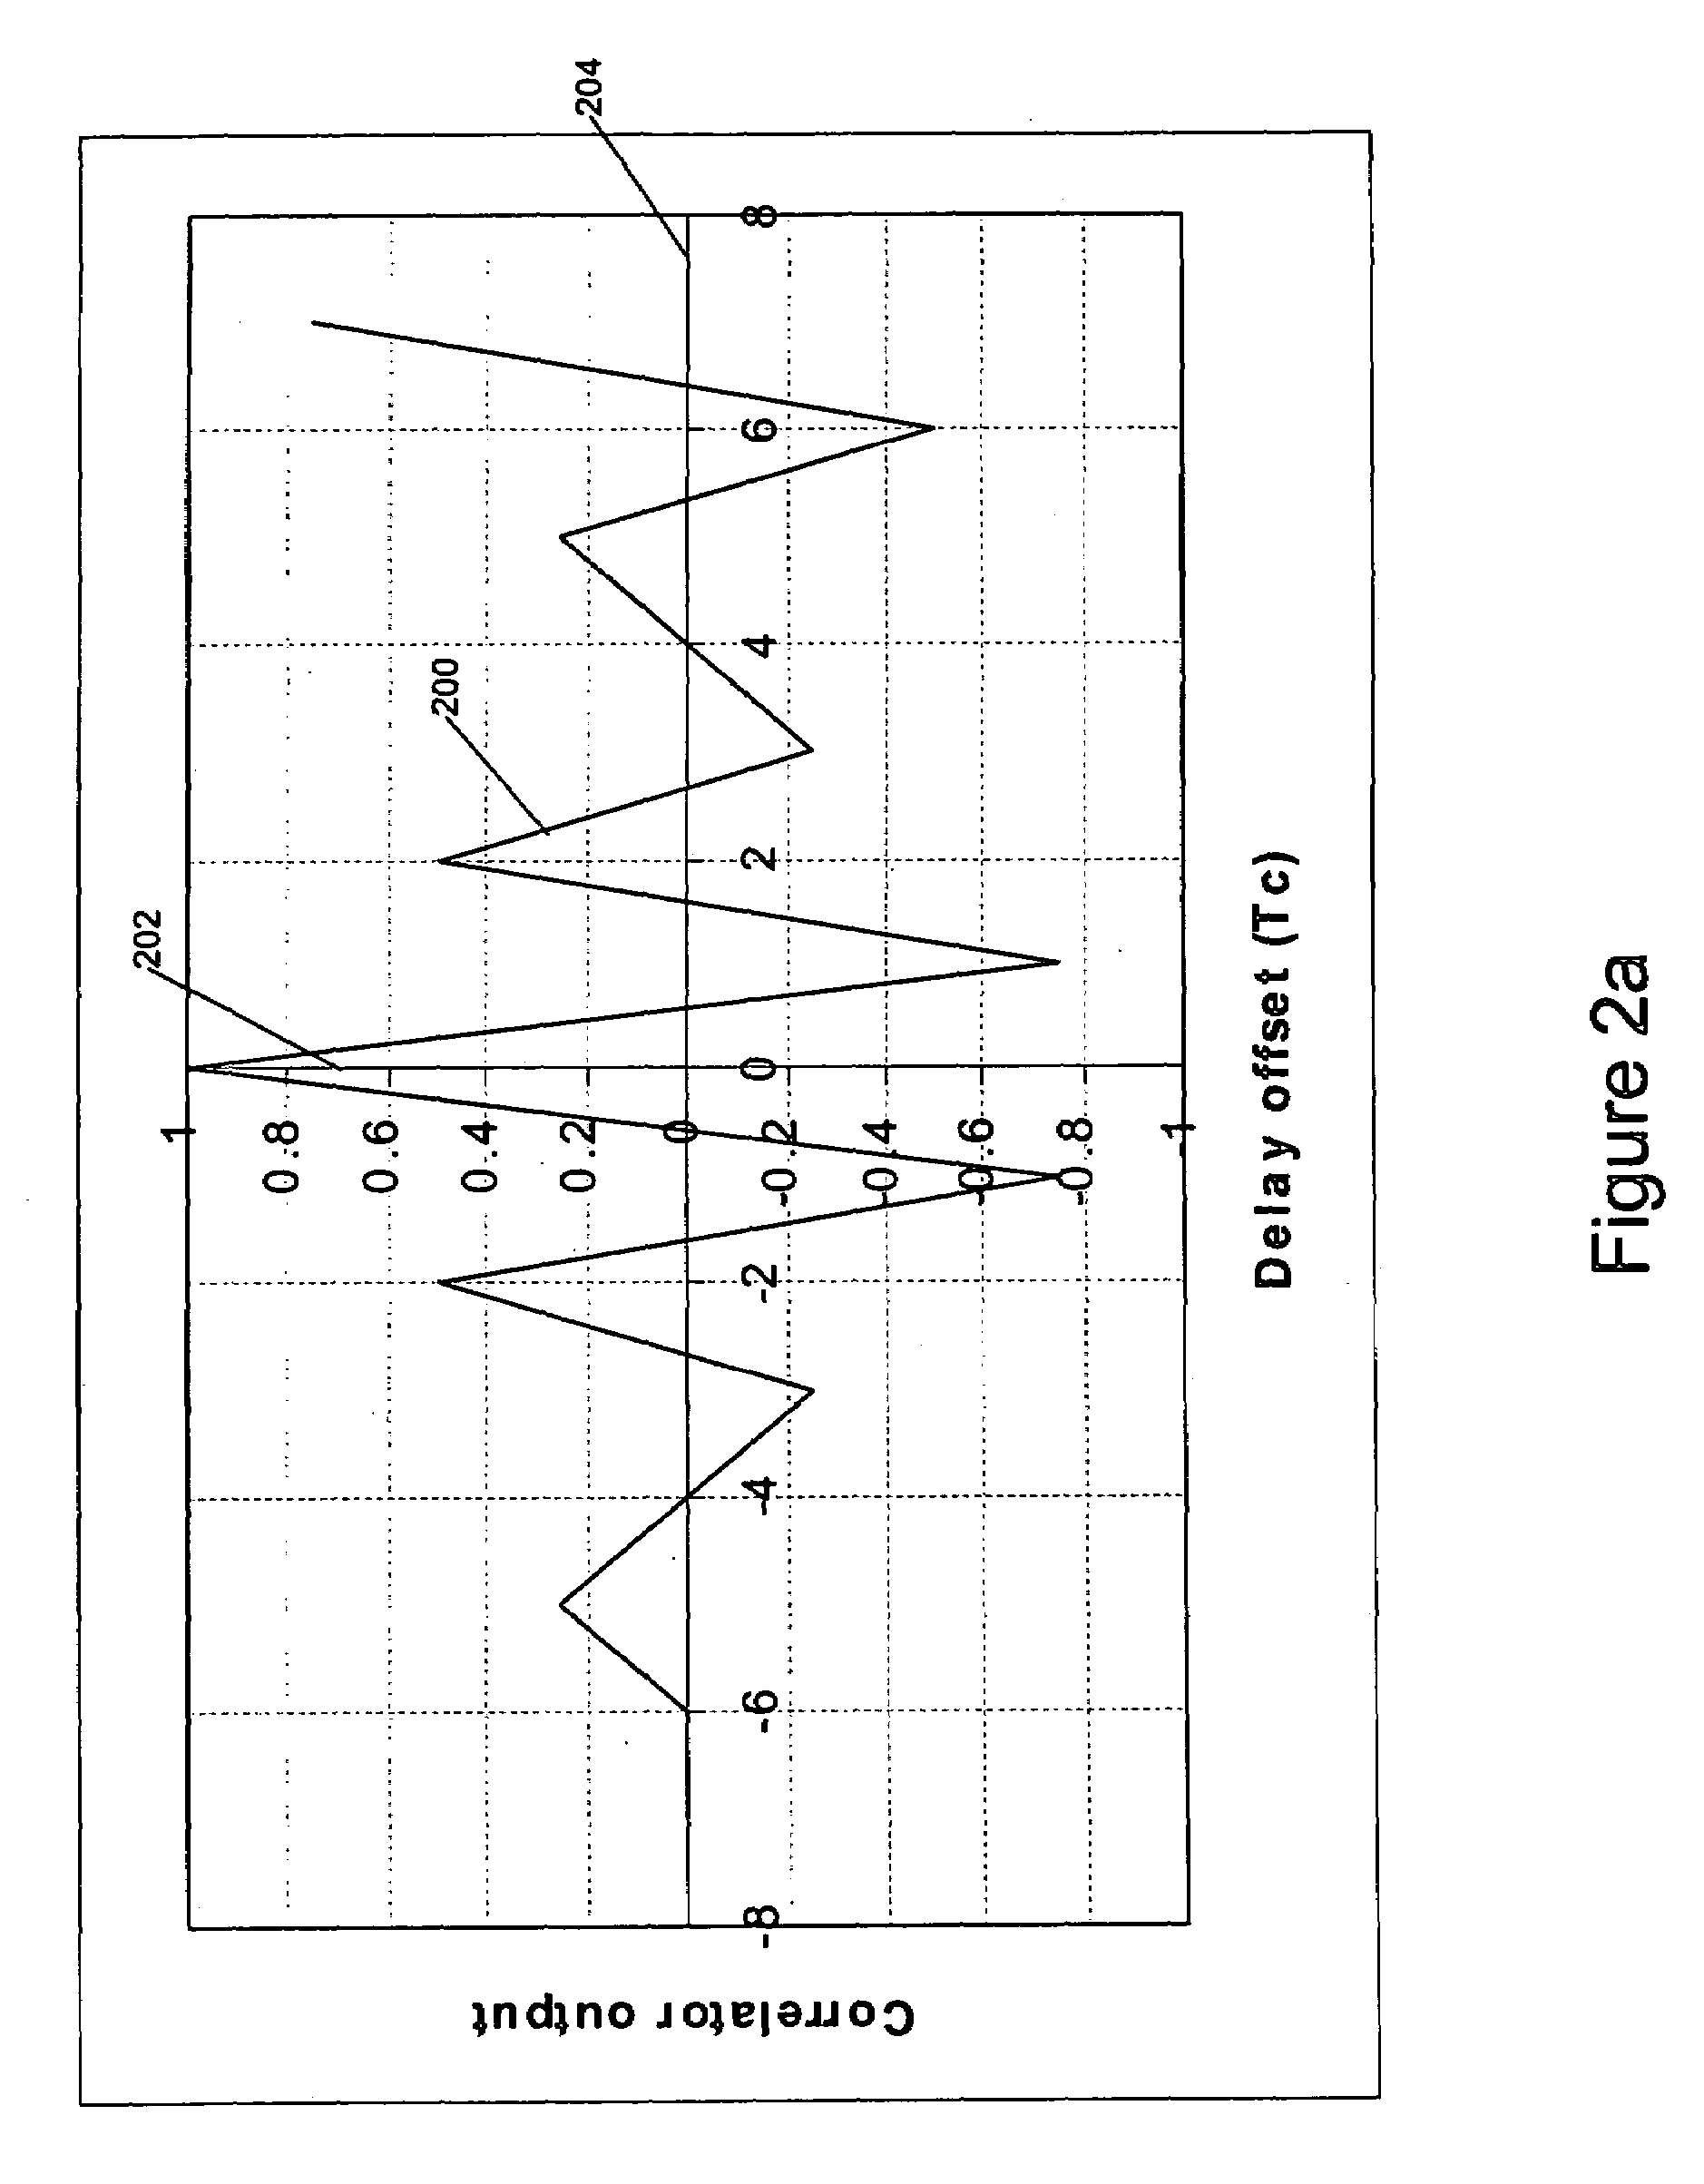 Receiver processing systems